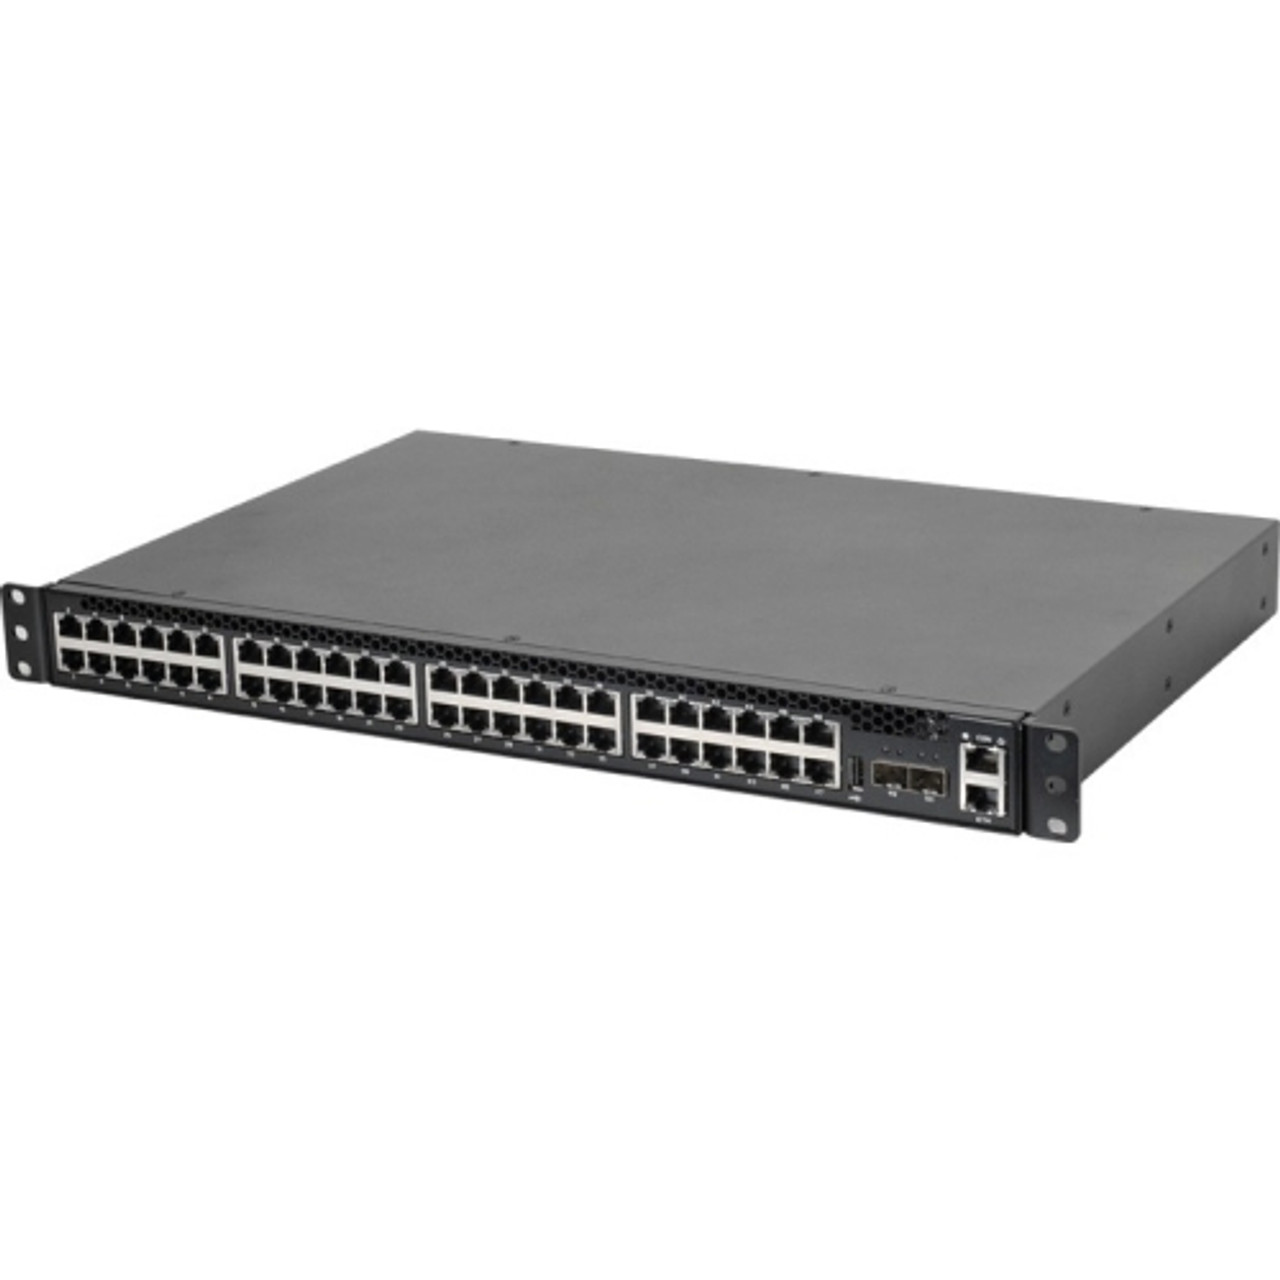 1LY4AZZ0ST1 Quanta 1G/10G Enterprise-Class Ethernet Switch 48 Network, 2 Expansion Slot Manageable Twisted Pair, Optical Fiber Modular 4 Layer Supported